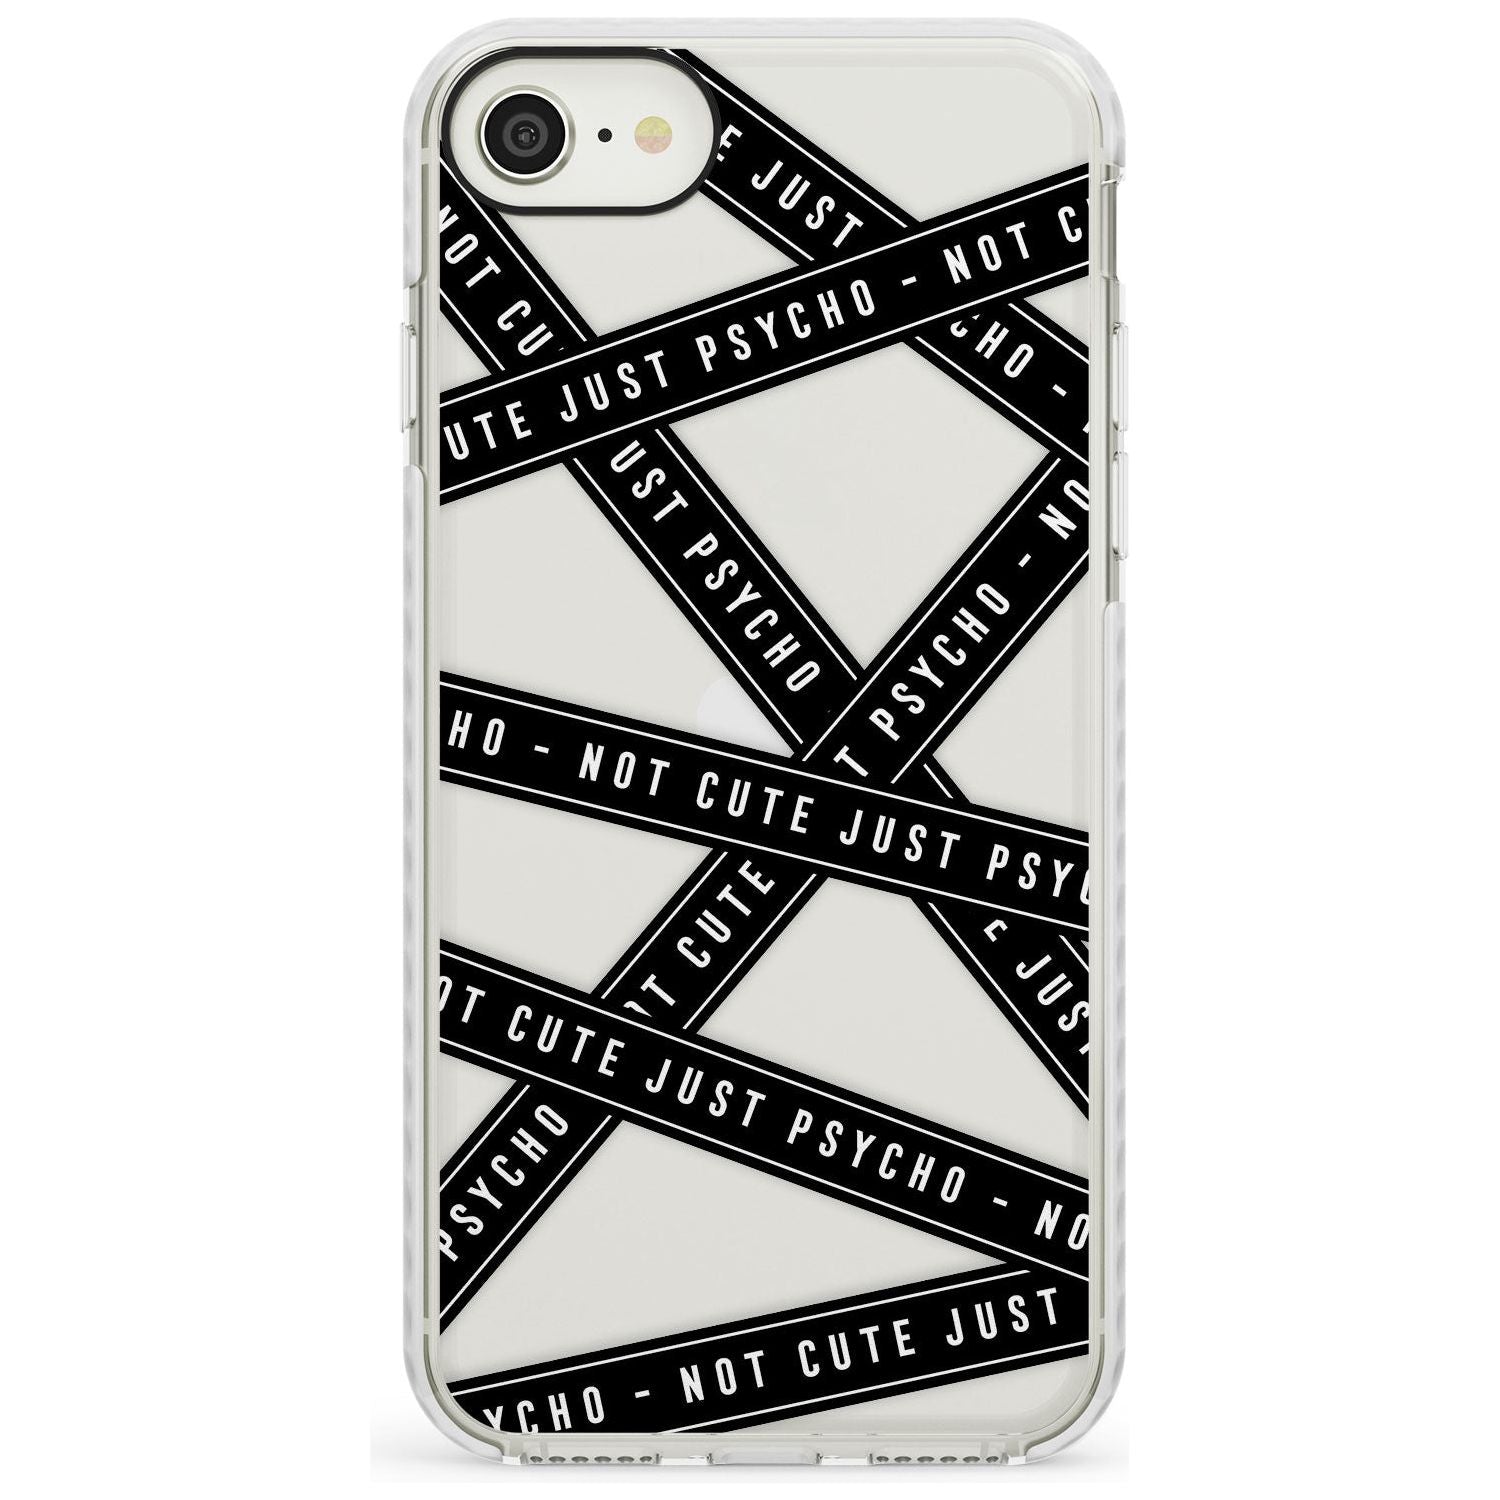 Caution Tape (Clear) Not Cute Just Psycho Impact Phone Case for iPhone SE 8 7 Plus